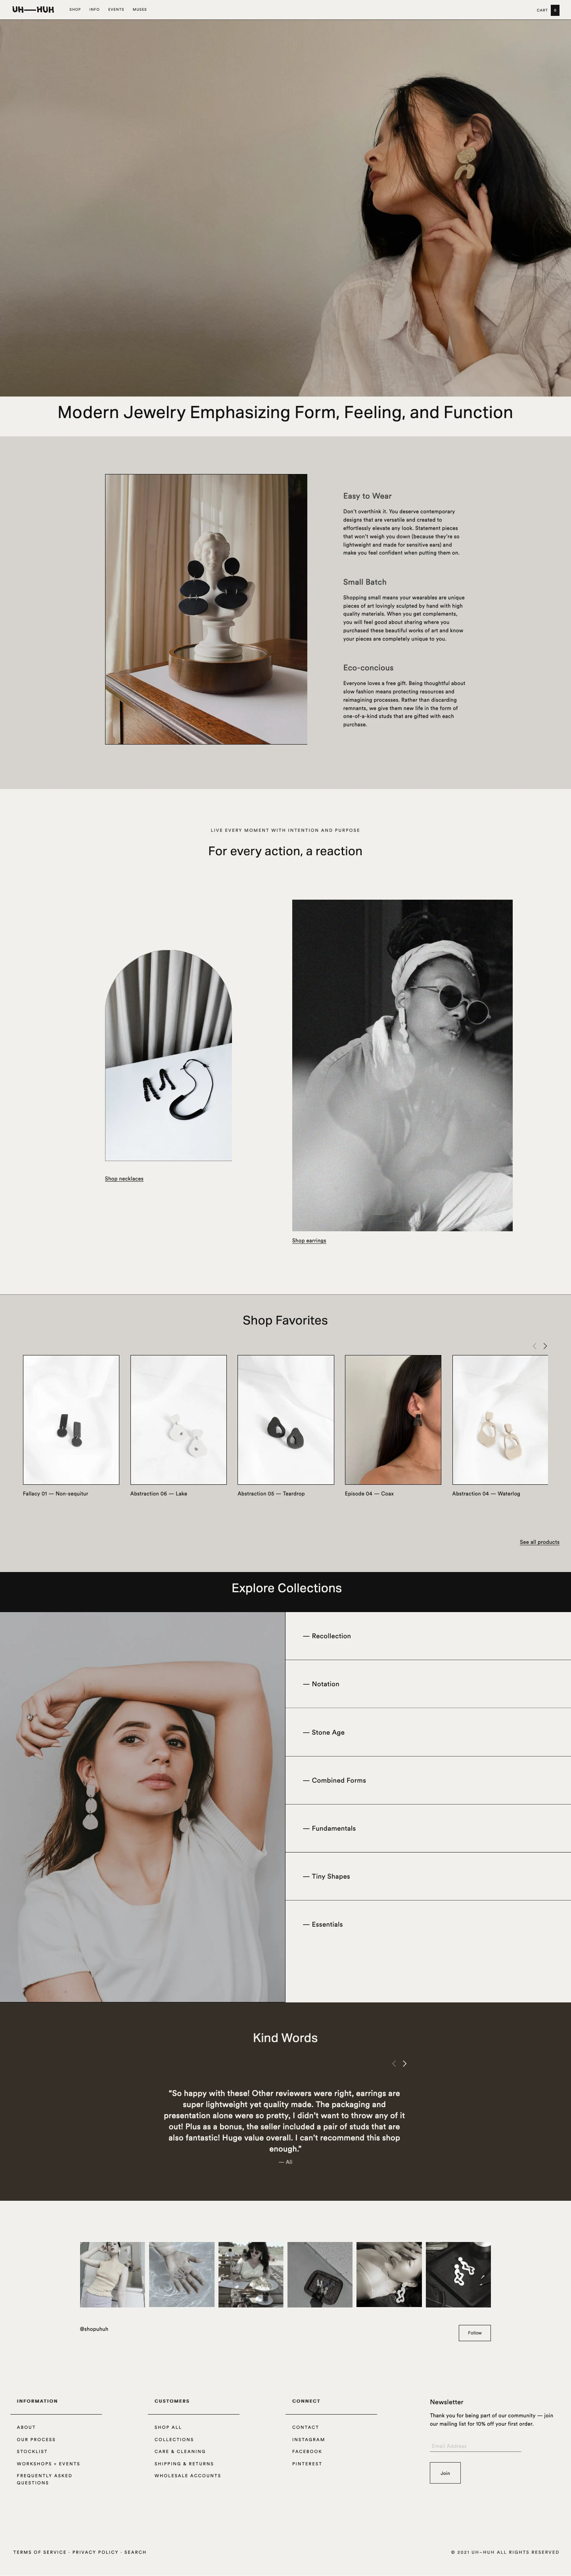 Uh–Huh Landing Page Example: Uh–Huh is a Philadelphia-based jewelry design studio sculpting objects that emphasize form, feeling, & function.